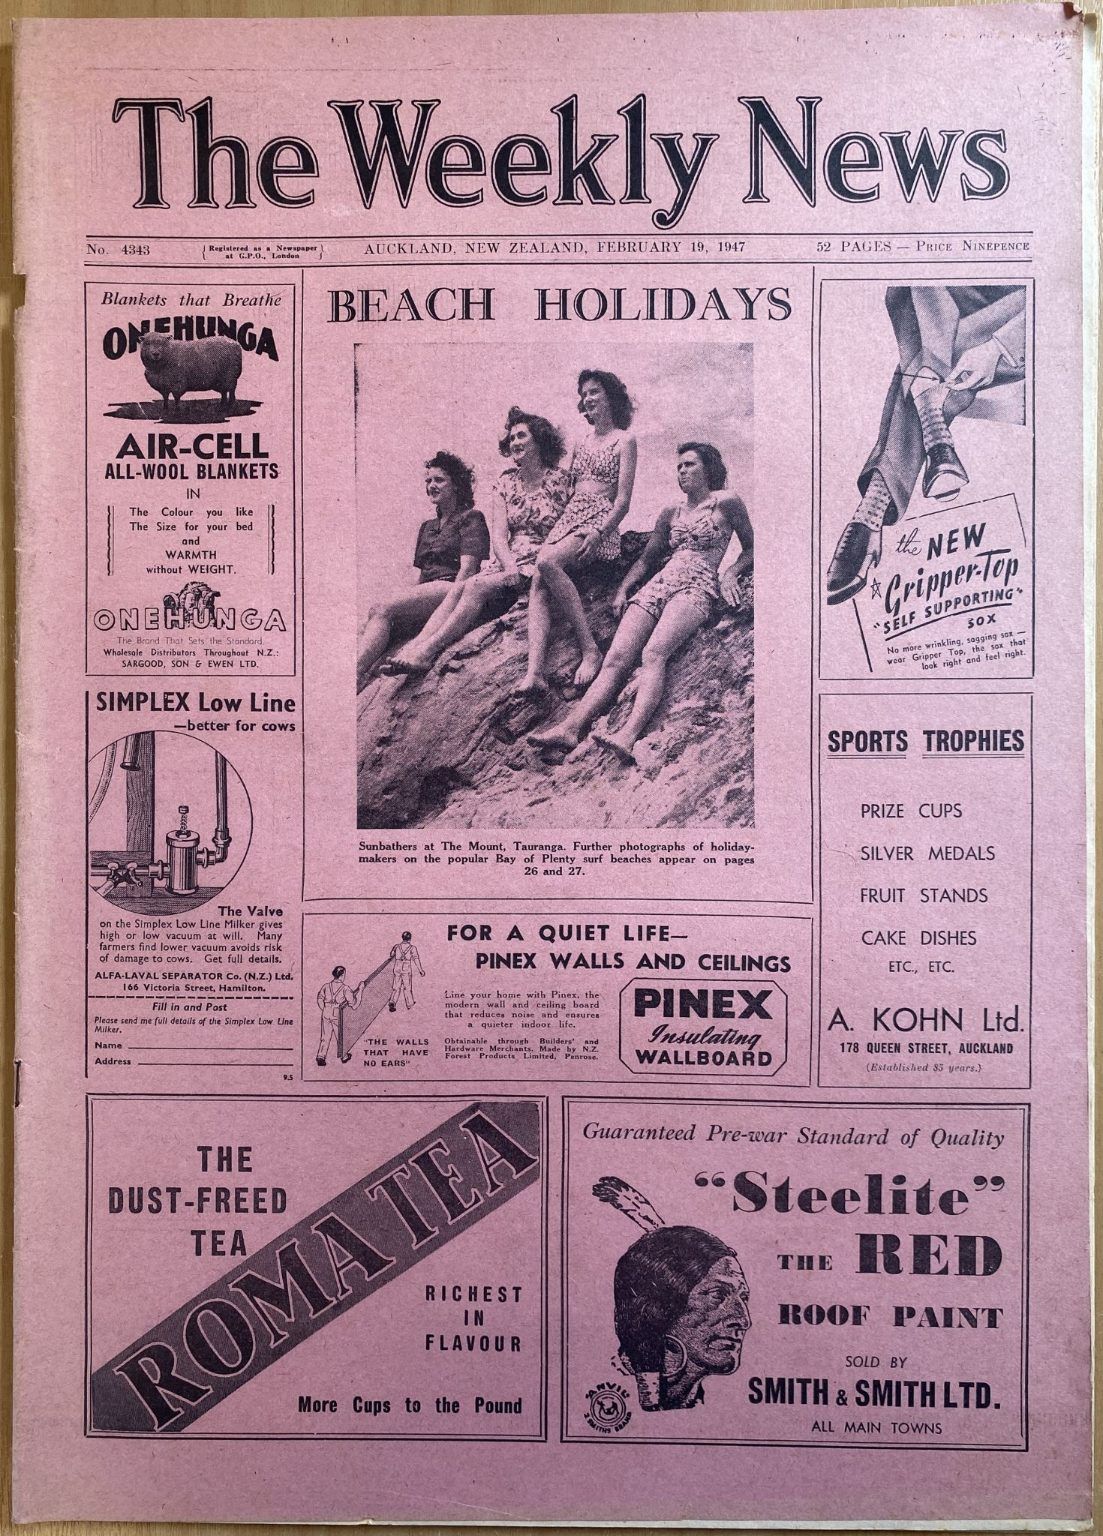 OLD NEWSPAPER: The Weekly News, No. 4343, 19 February 1947